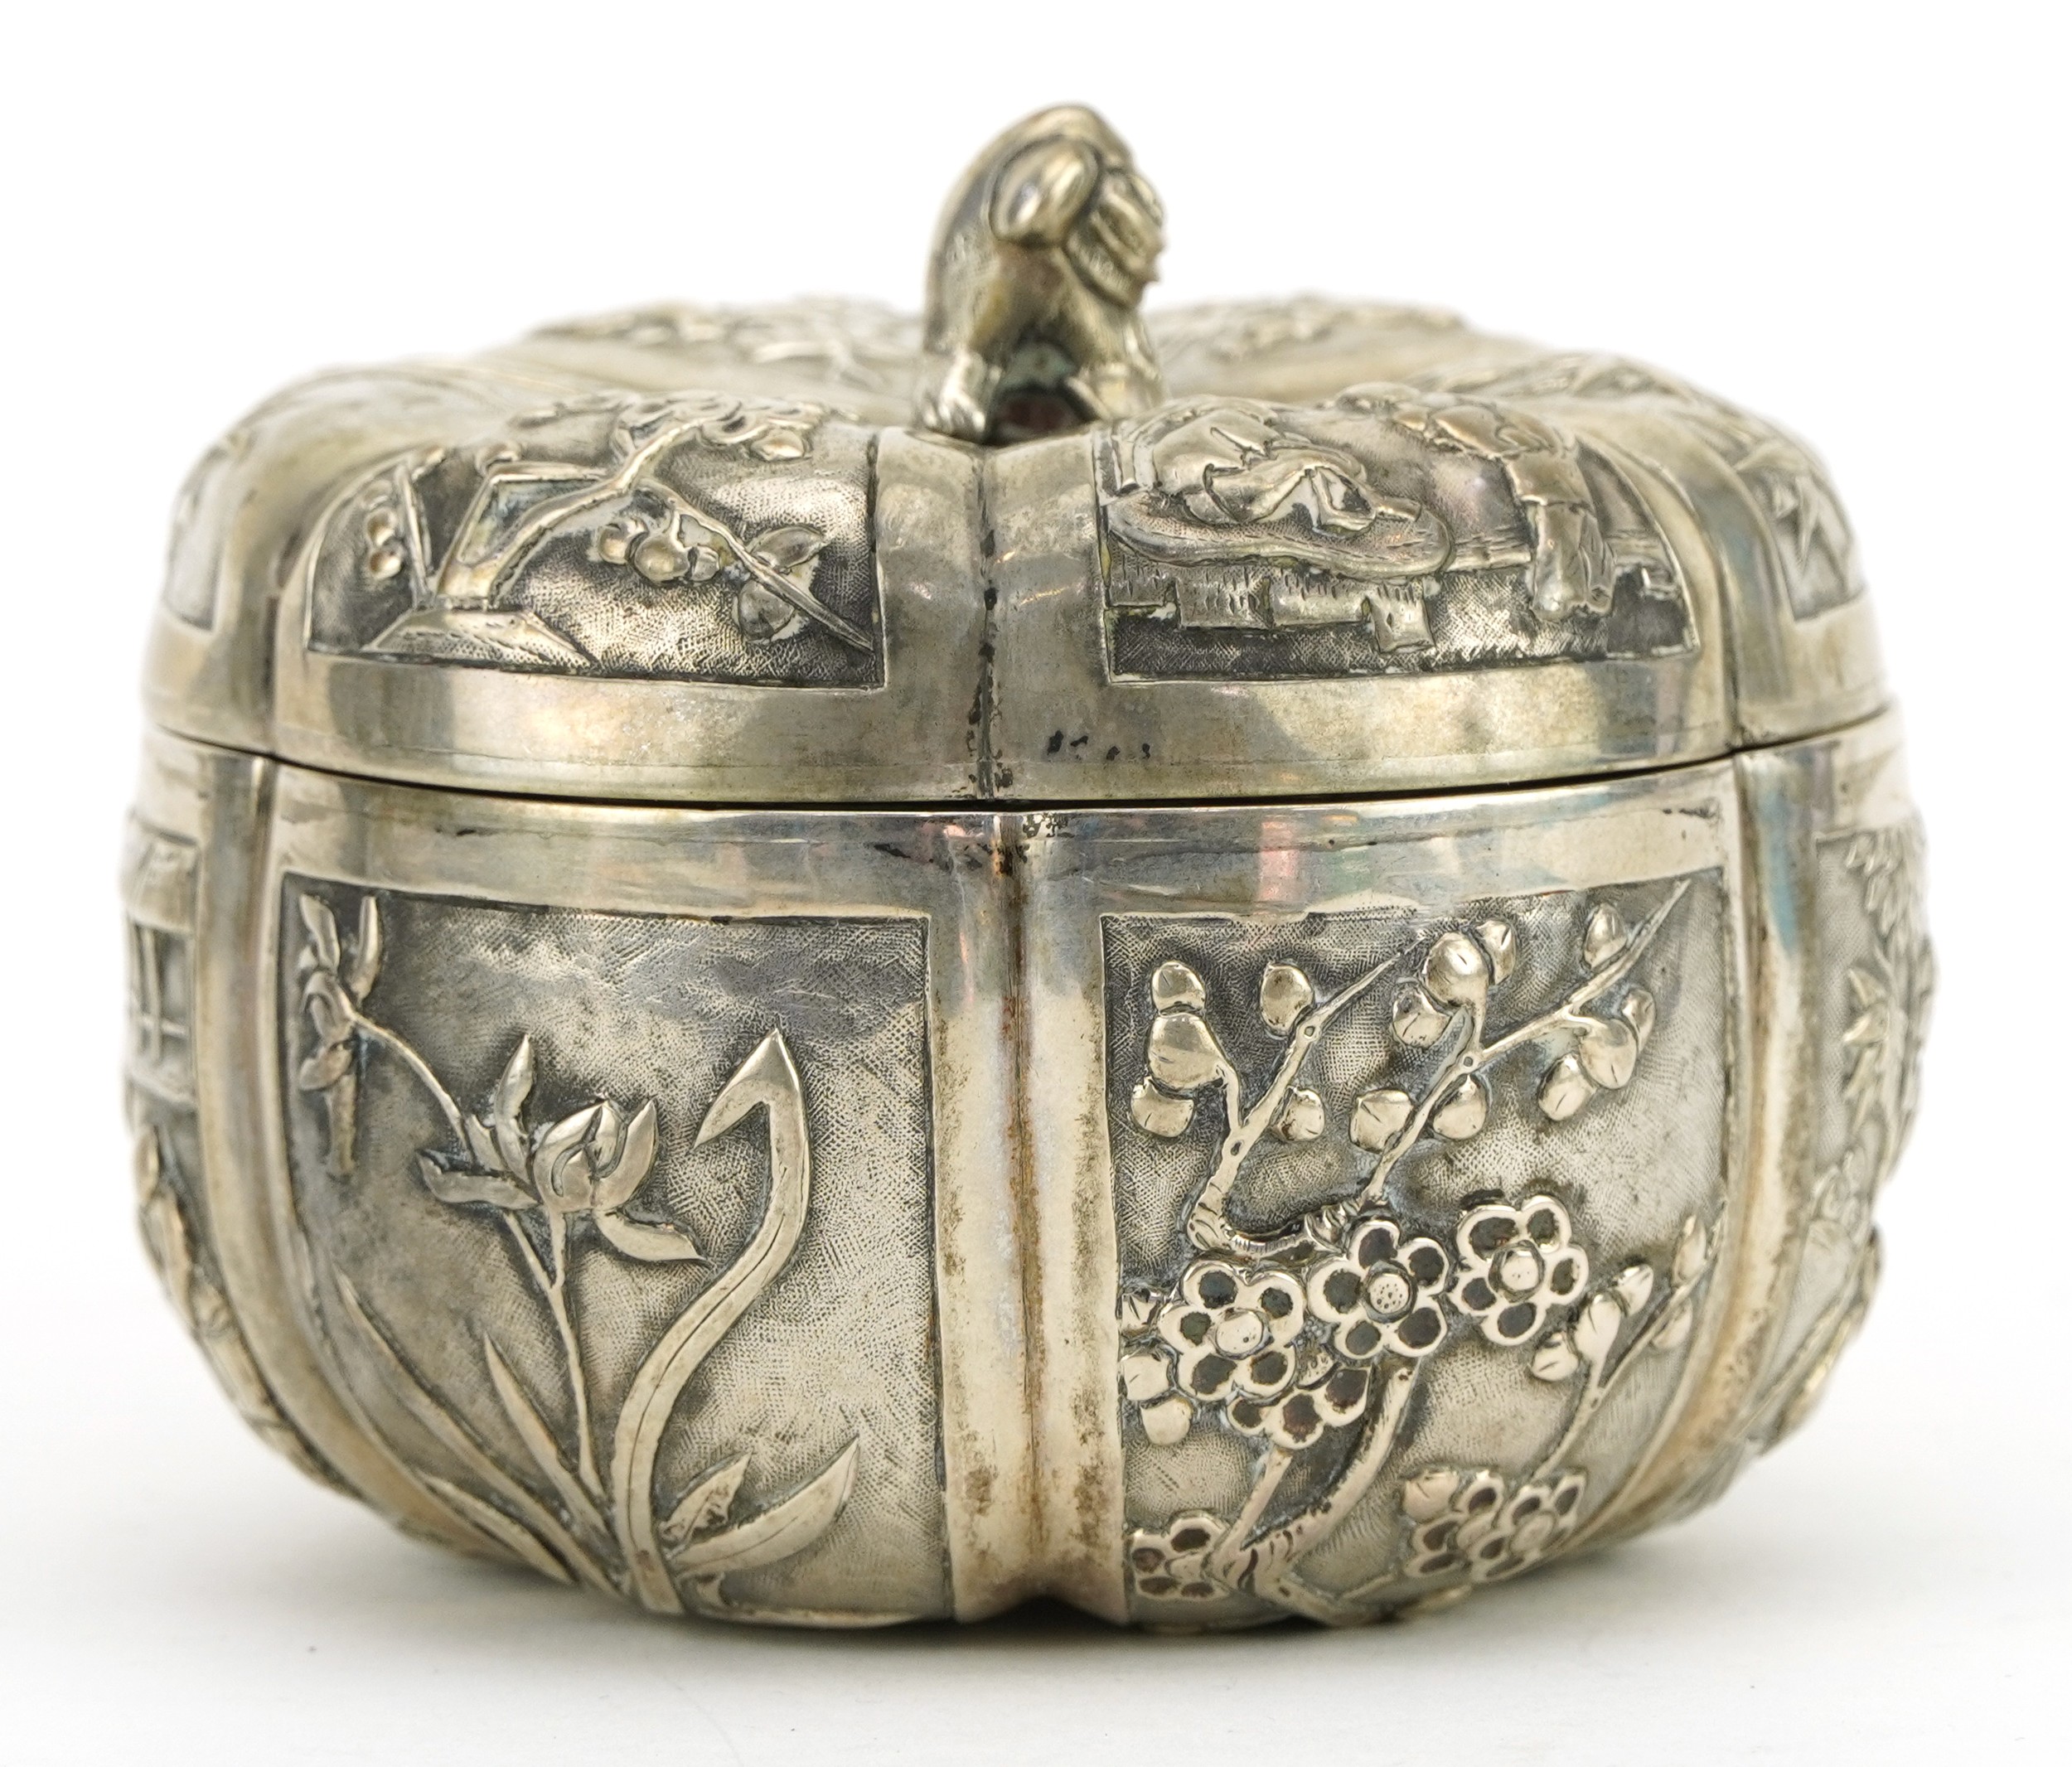 Good Chinese export silver box and cover in the form of a pumpkin embossed with figures, bamboo - Image 7 of 12